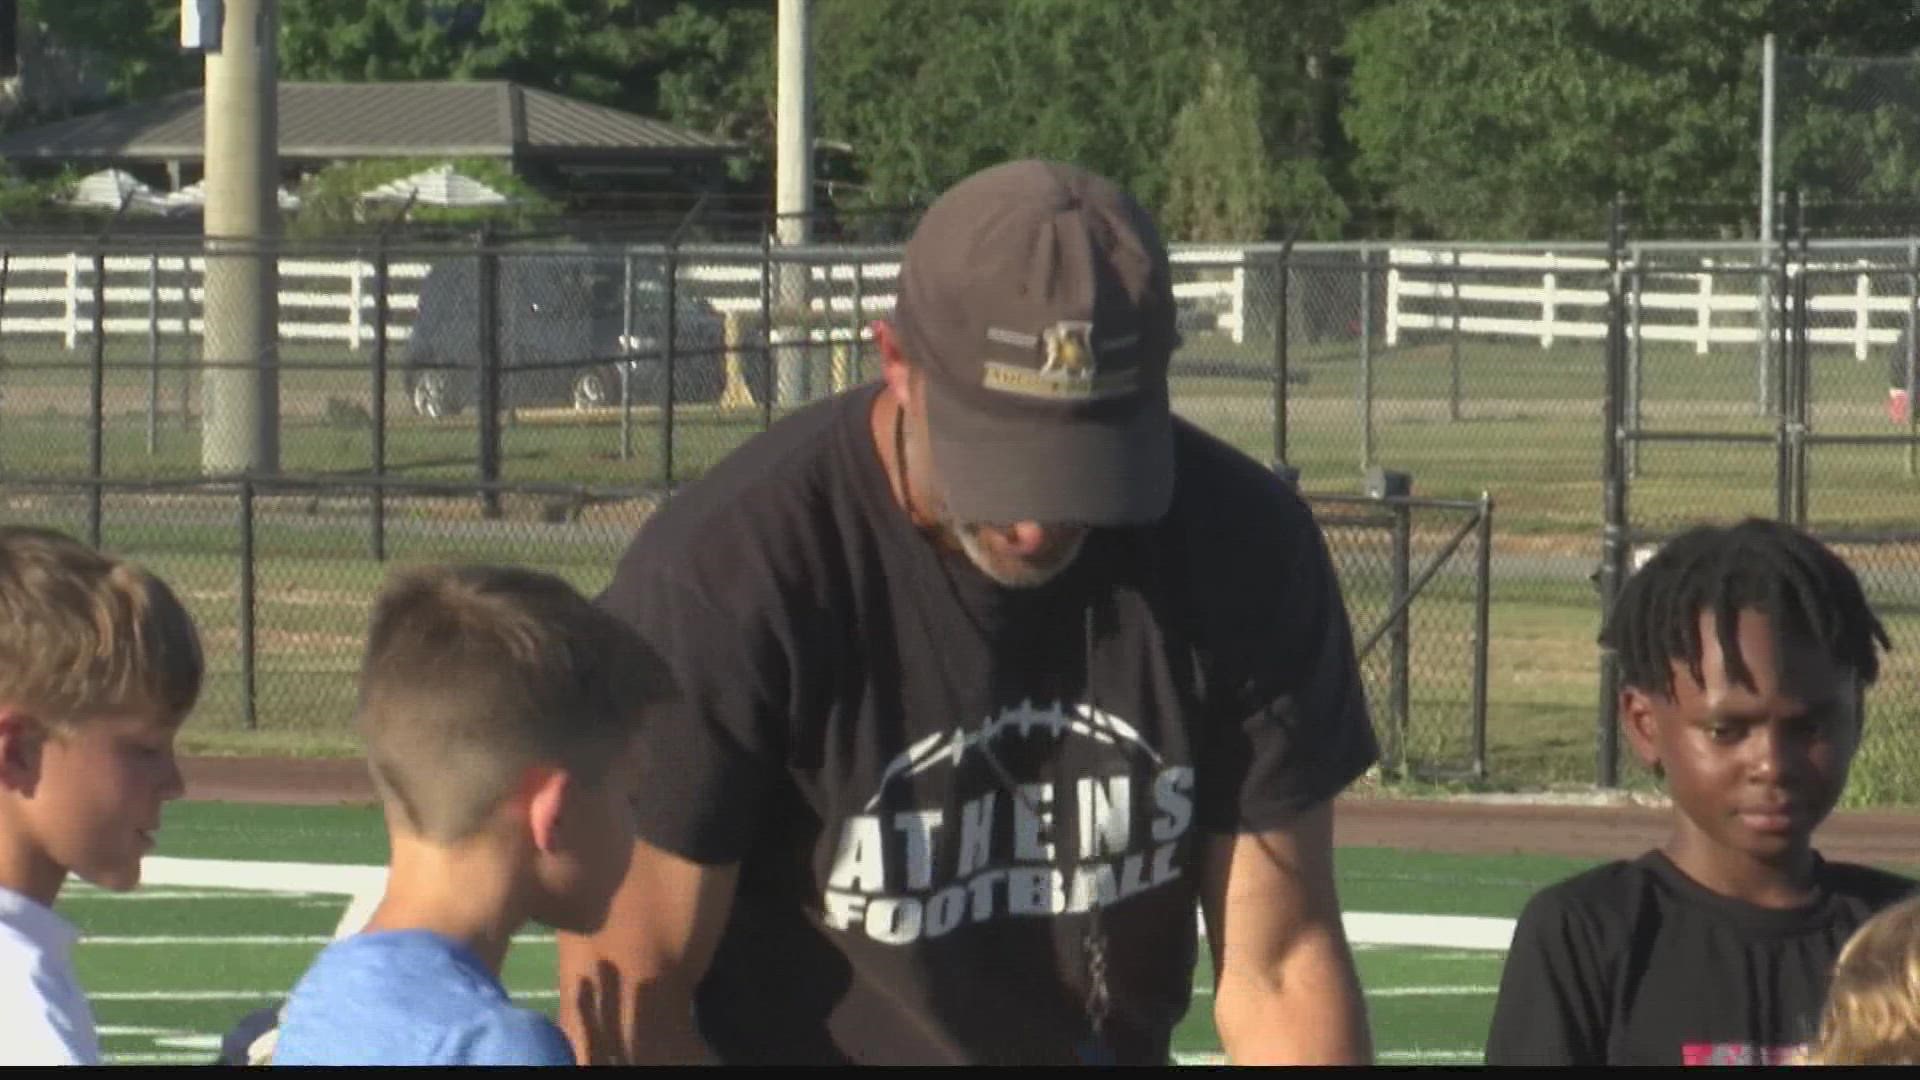 Cody Gross and his staff hosted their annual youth football camp today in Athens. The camp was open to football players in 1st-6th grade.